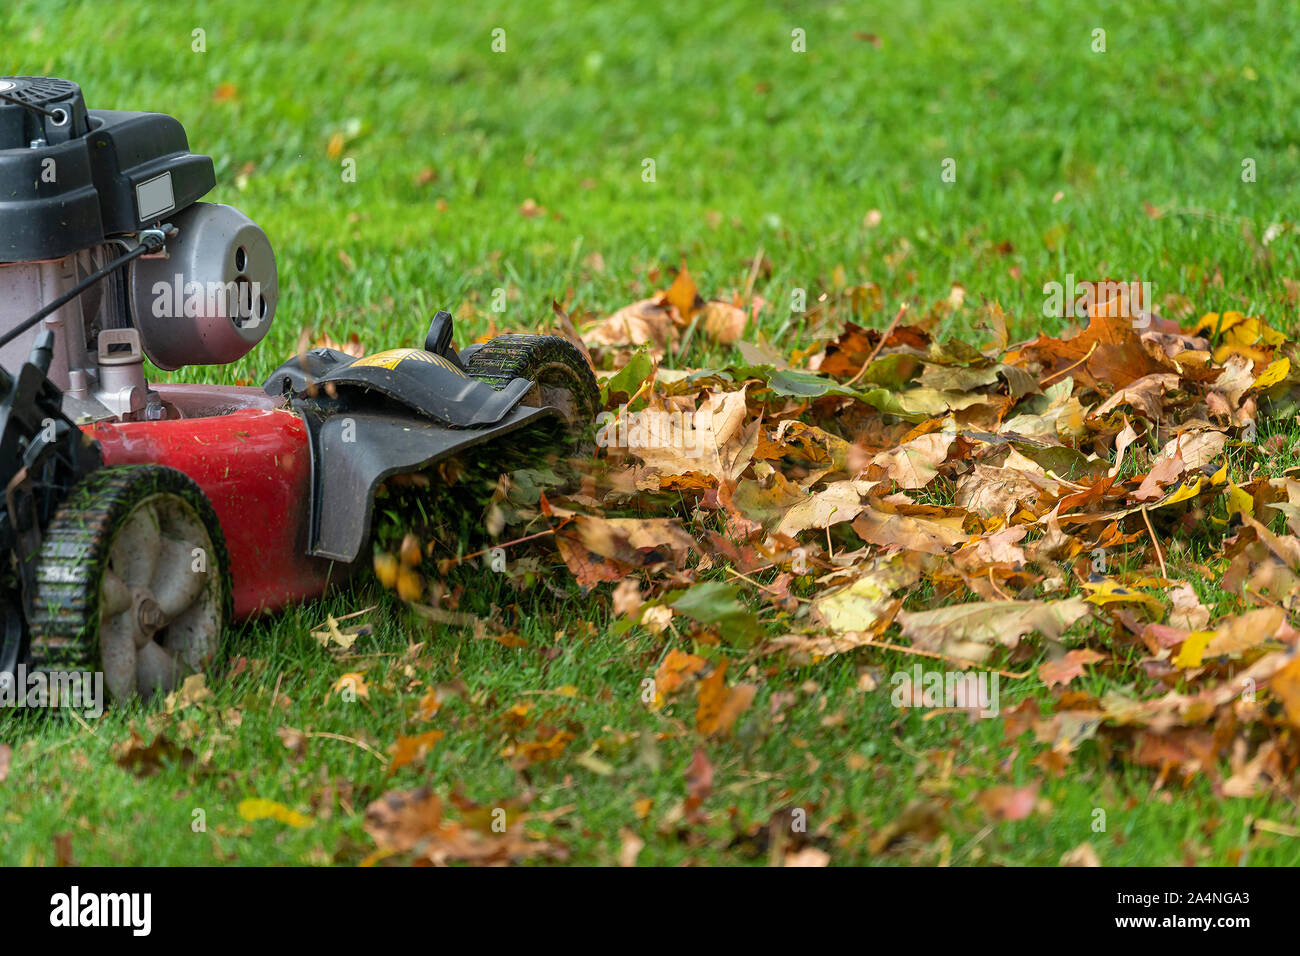 Lawn mover mulching up fall leaves. Stock Photo